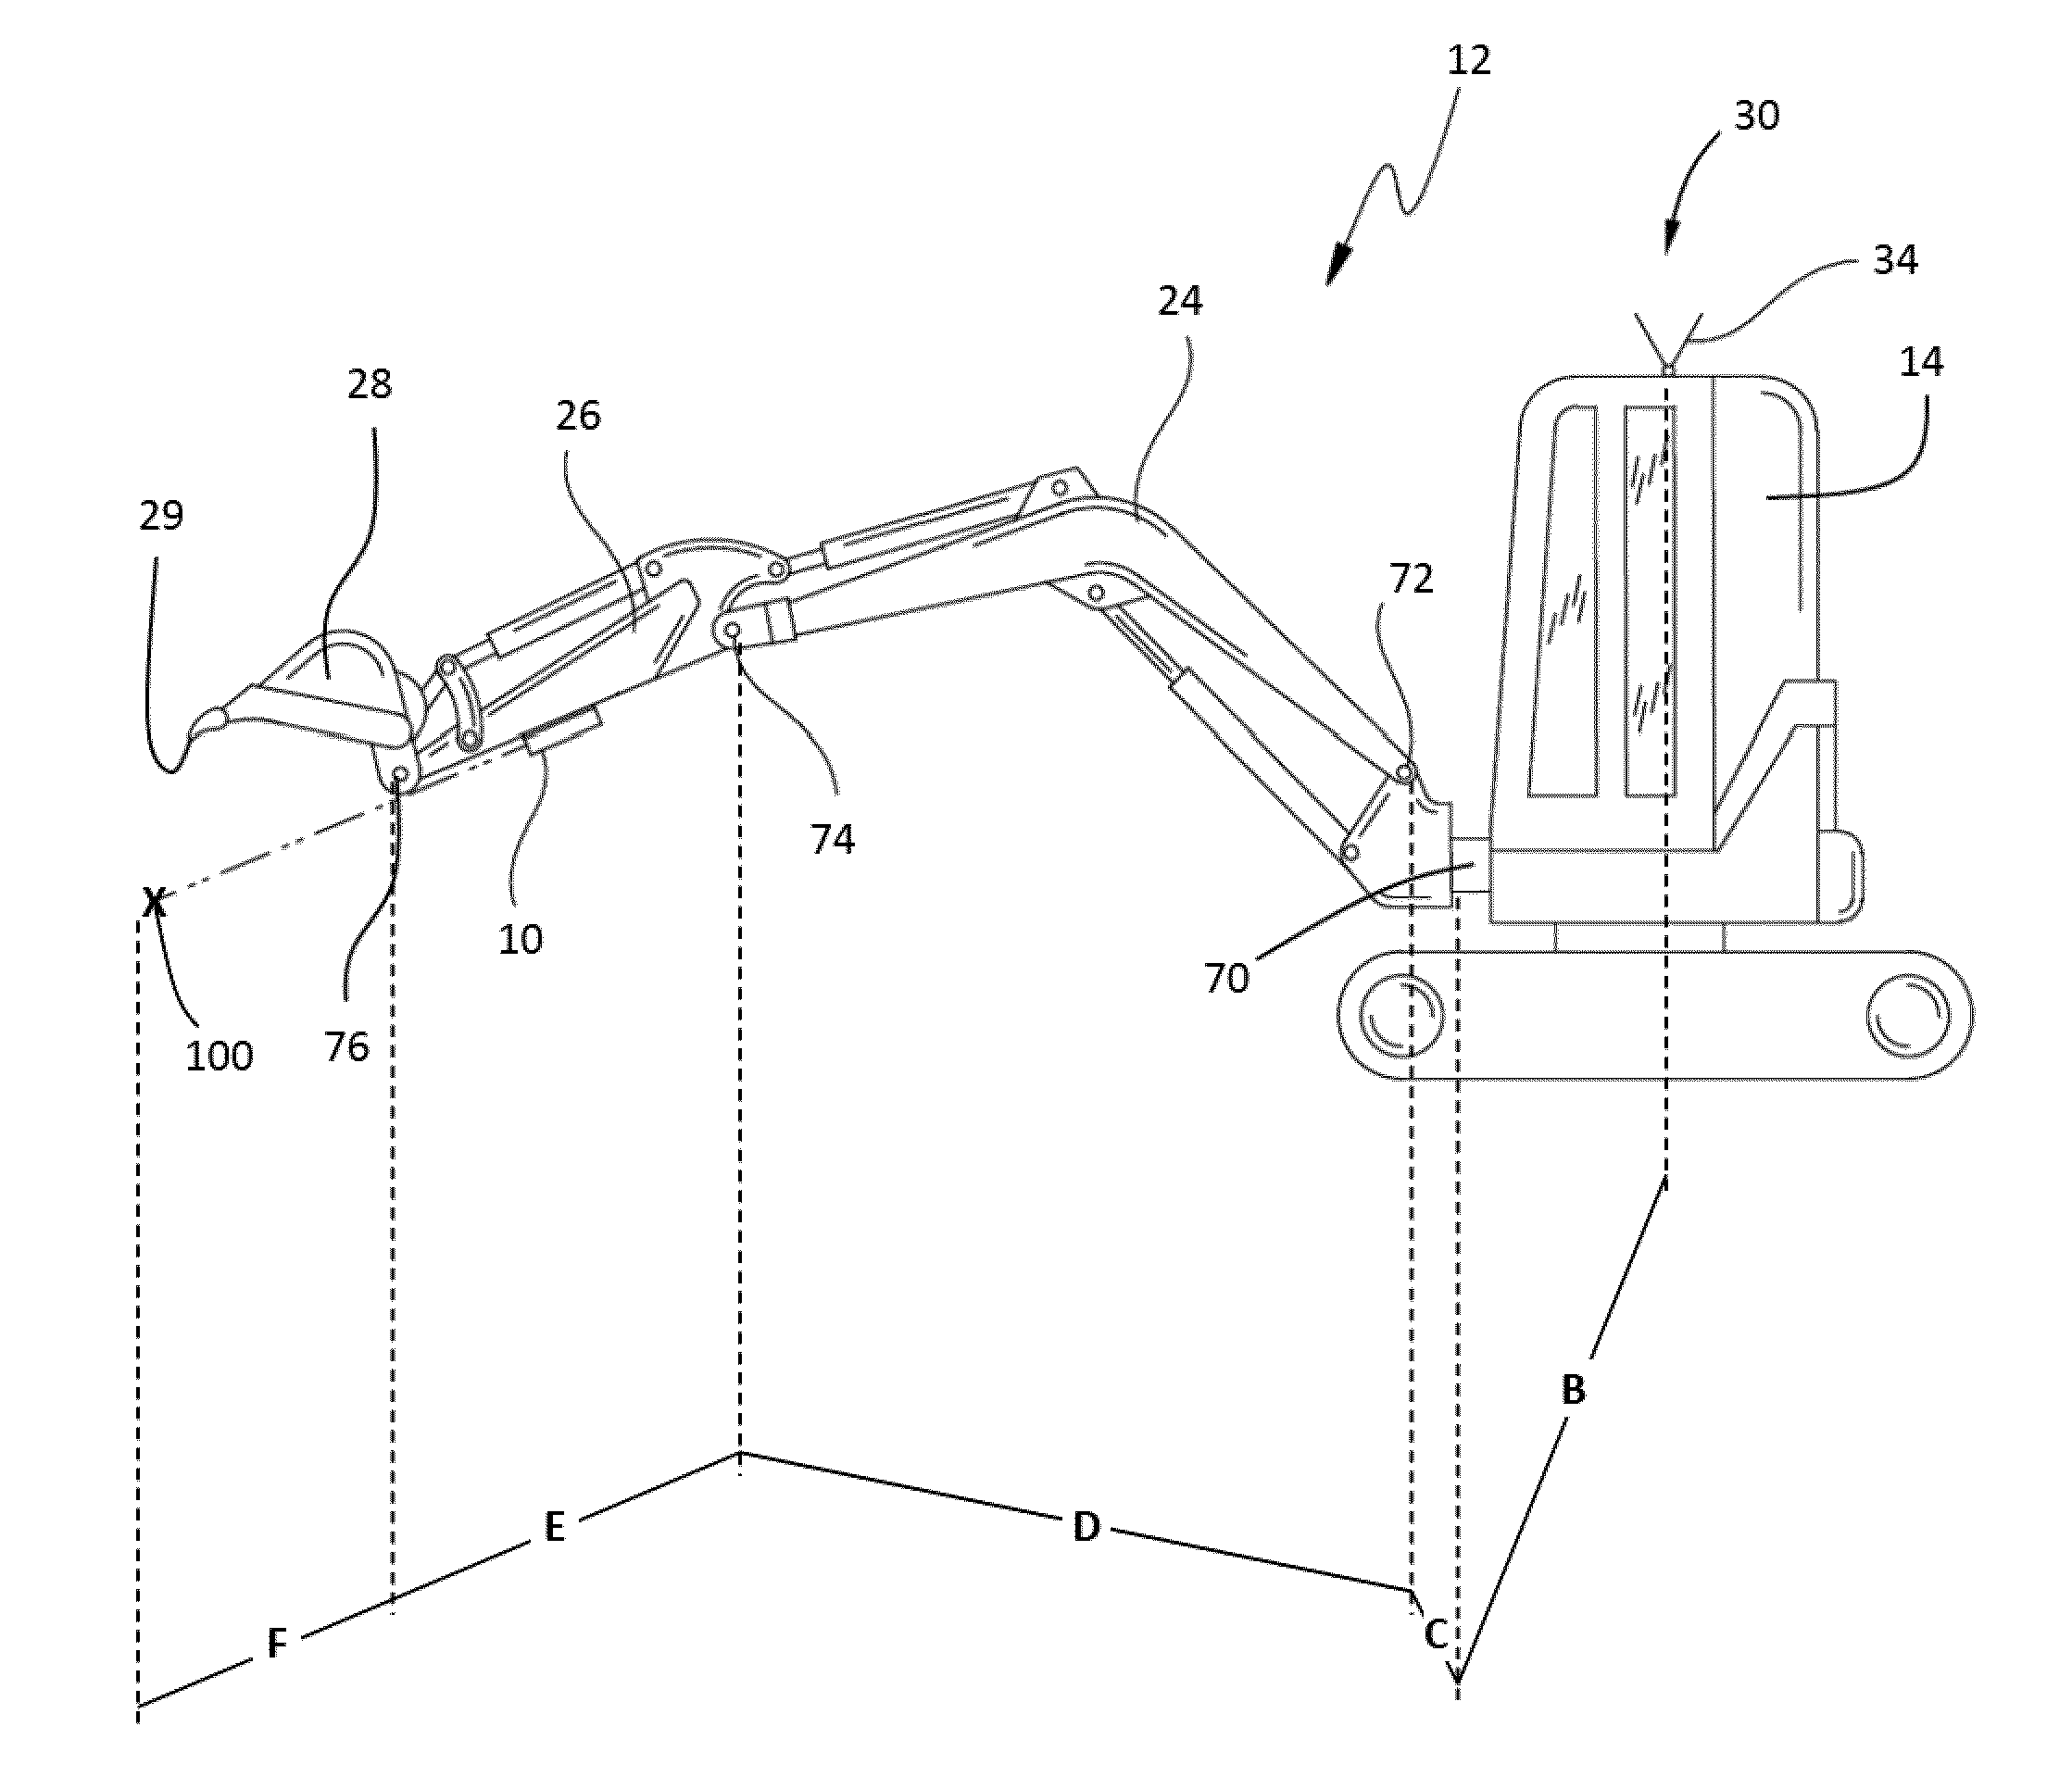 Three dimensional feature location from an excavator